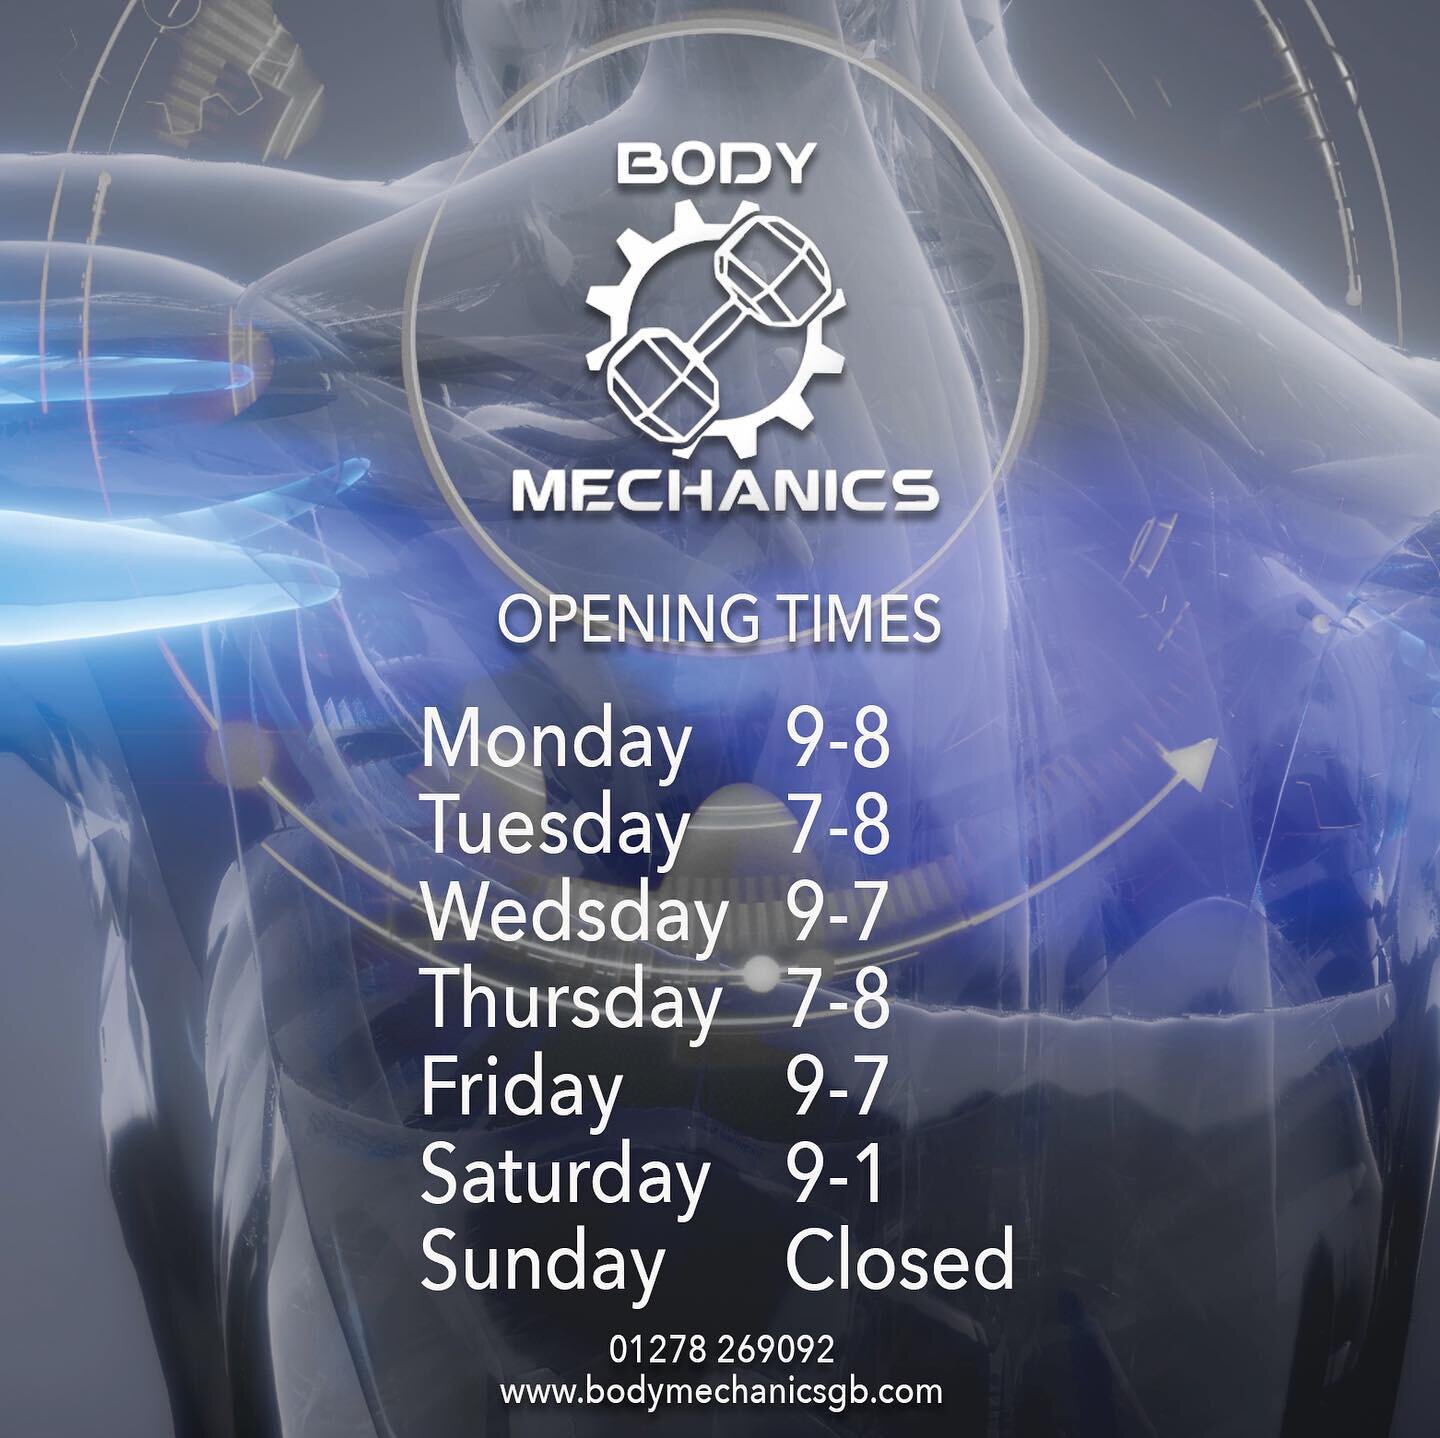 OPENING TIMES.  Save this or screen grab it so you have it!

🦾 🦾 🦾⁠
#BodyMechanicsBridgwater⁠
.⁠
.⁠
.⁠
.⁠
.⁠
.⁠
.⁠
.⁠
.⁠
#gym #gymlife #bridgwater #bridgwater #bridgwatermassage #massage #massagetherapy #massagetherapist  #sportsmassage #glastonbu